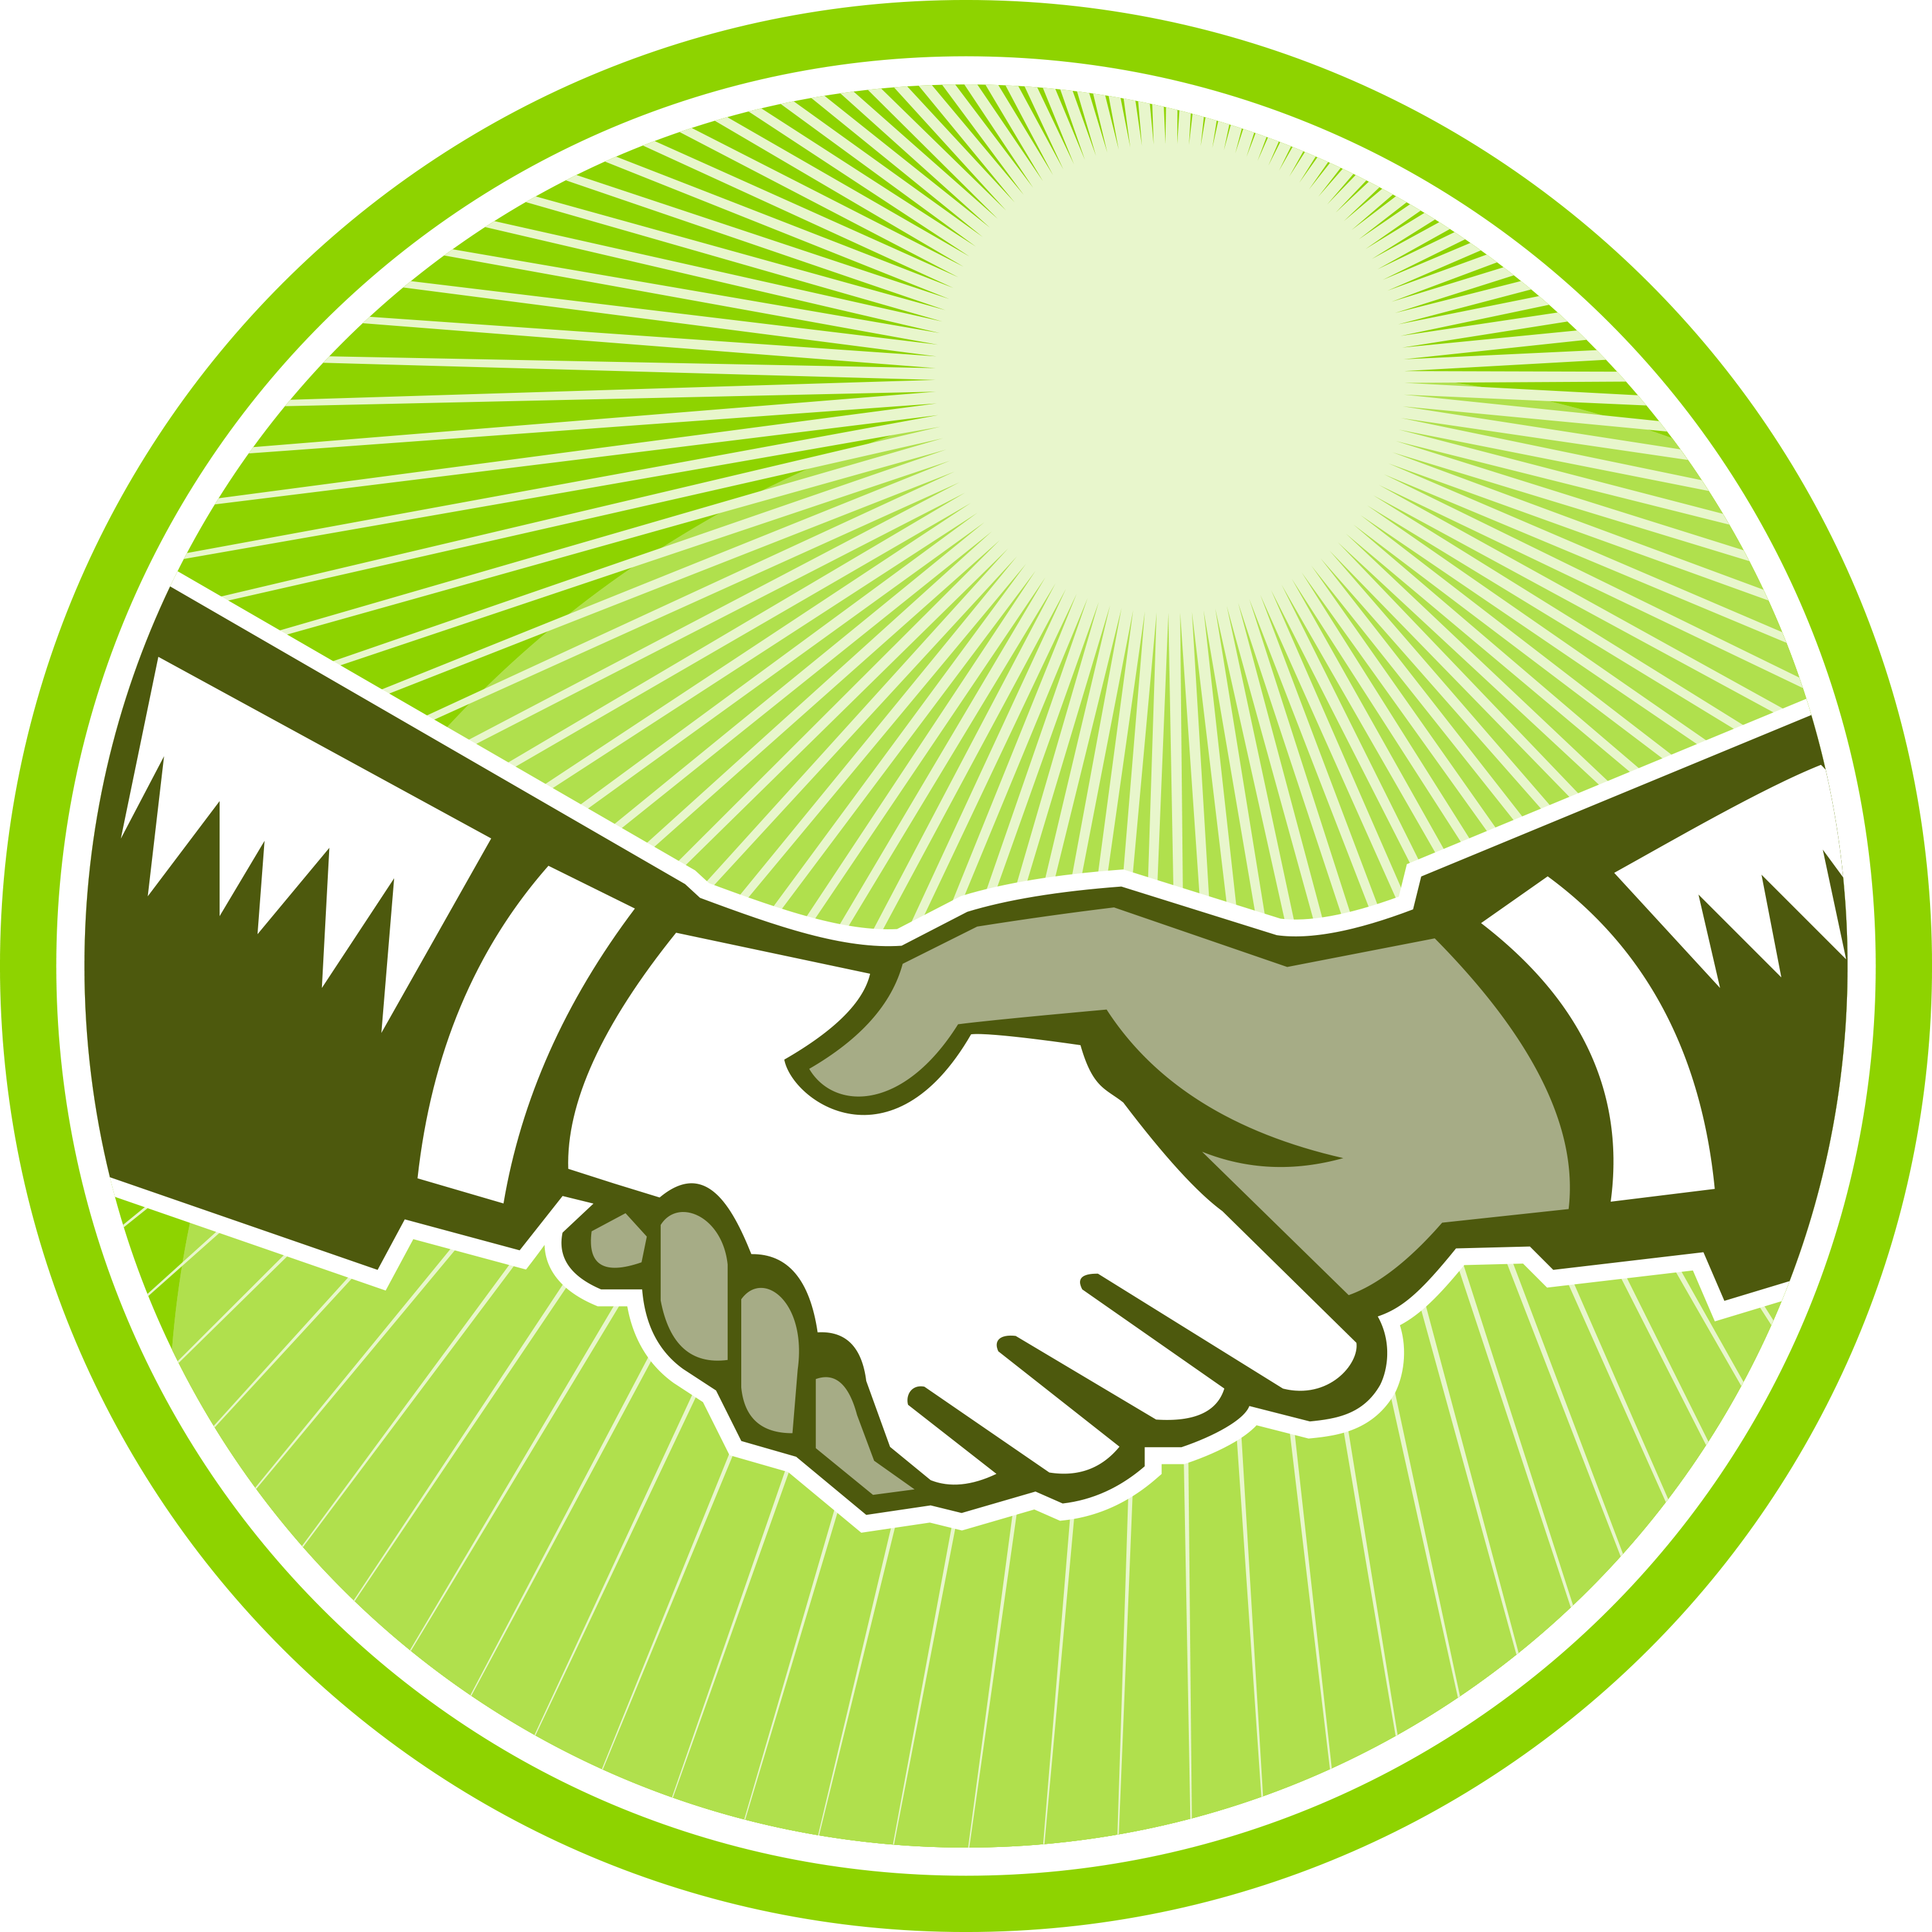 Why you shouldn t. Handshake clipart green